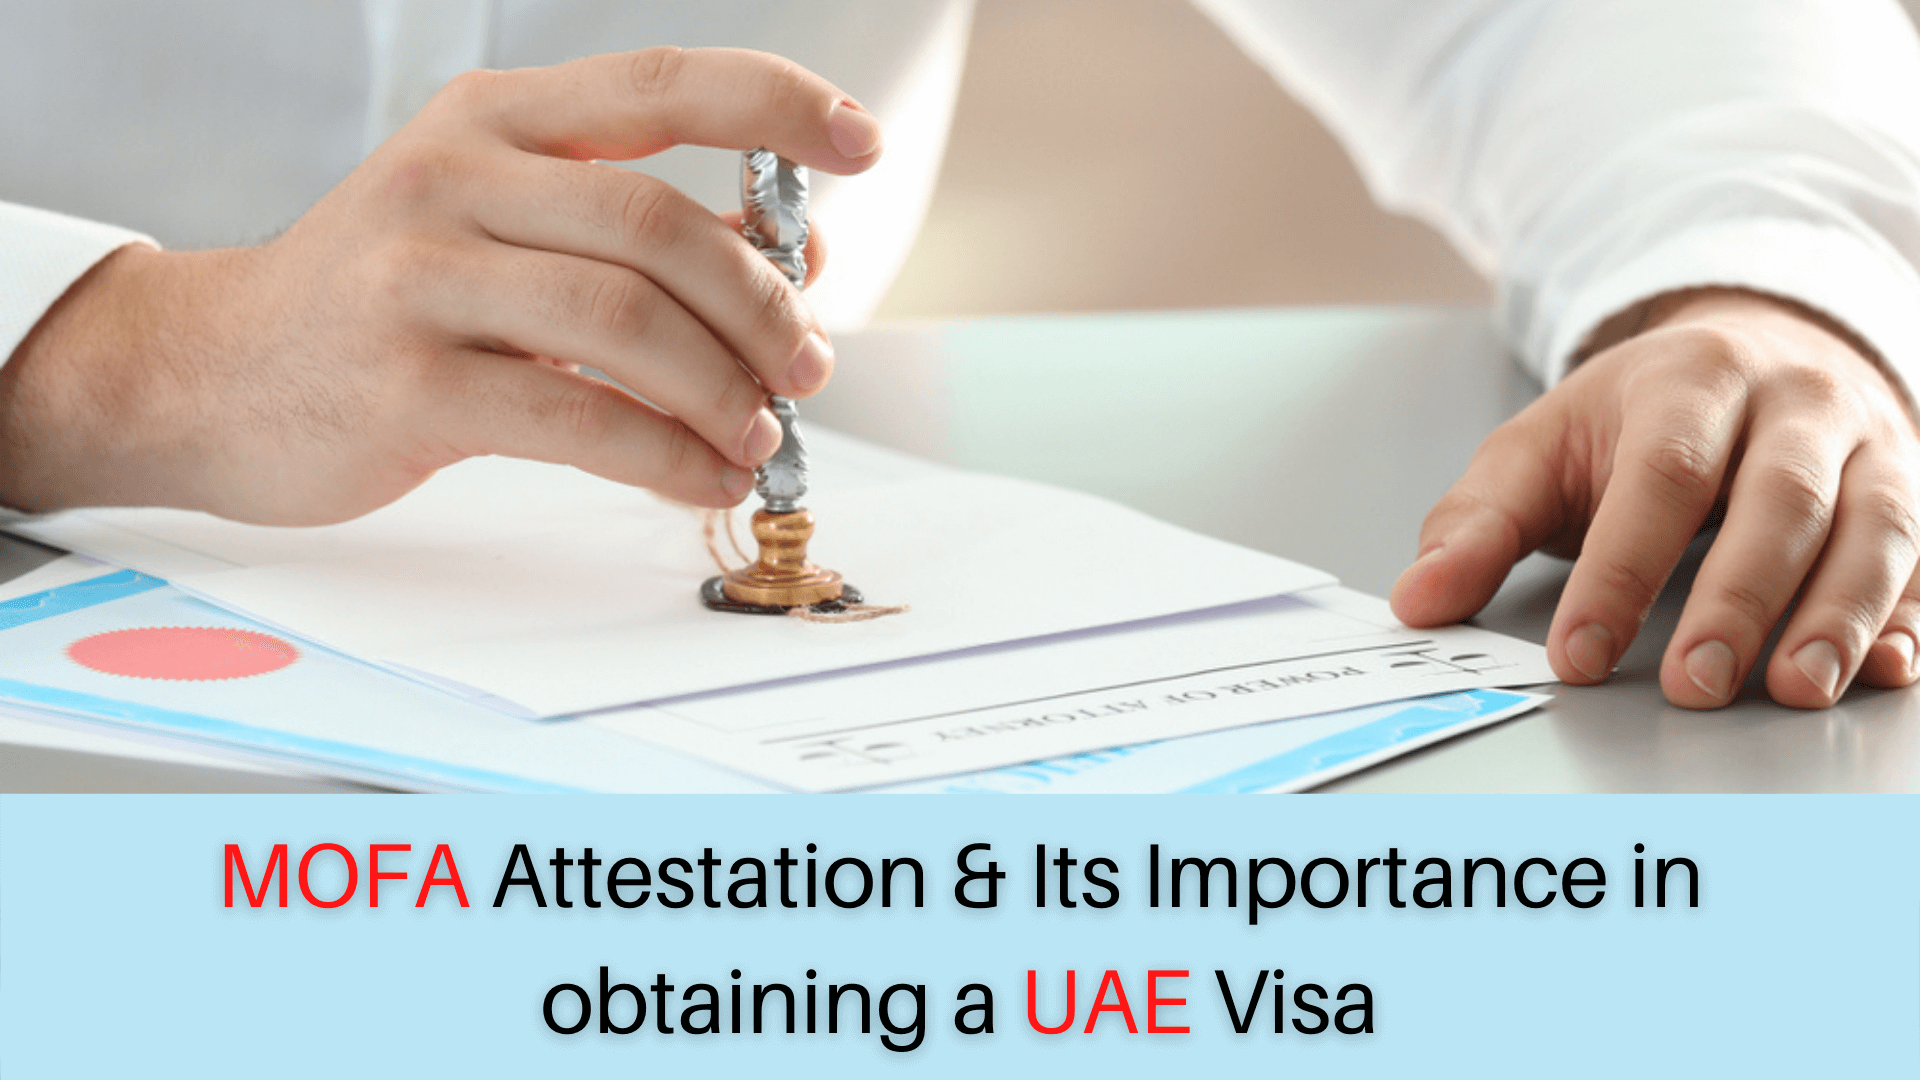 MOFA Attestation and Its Importance in obtaining a UAE Visa